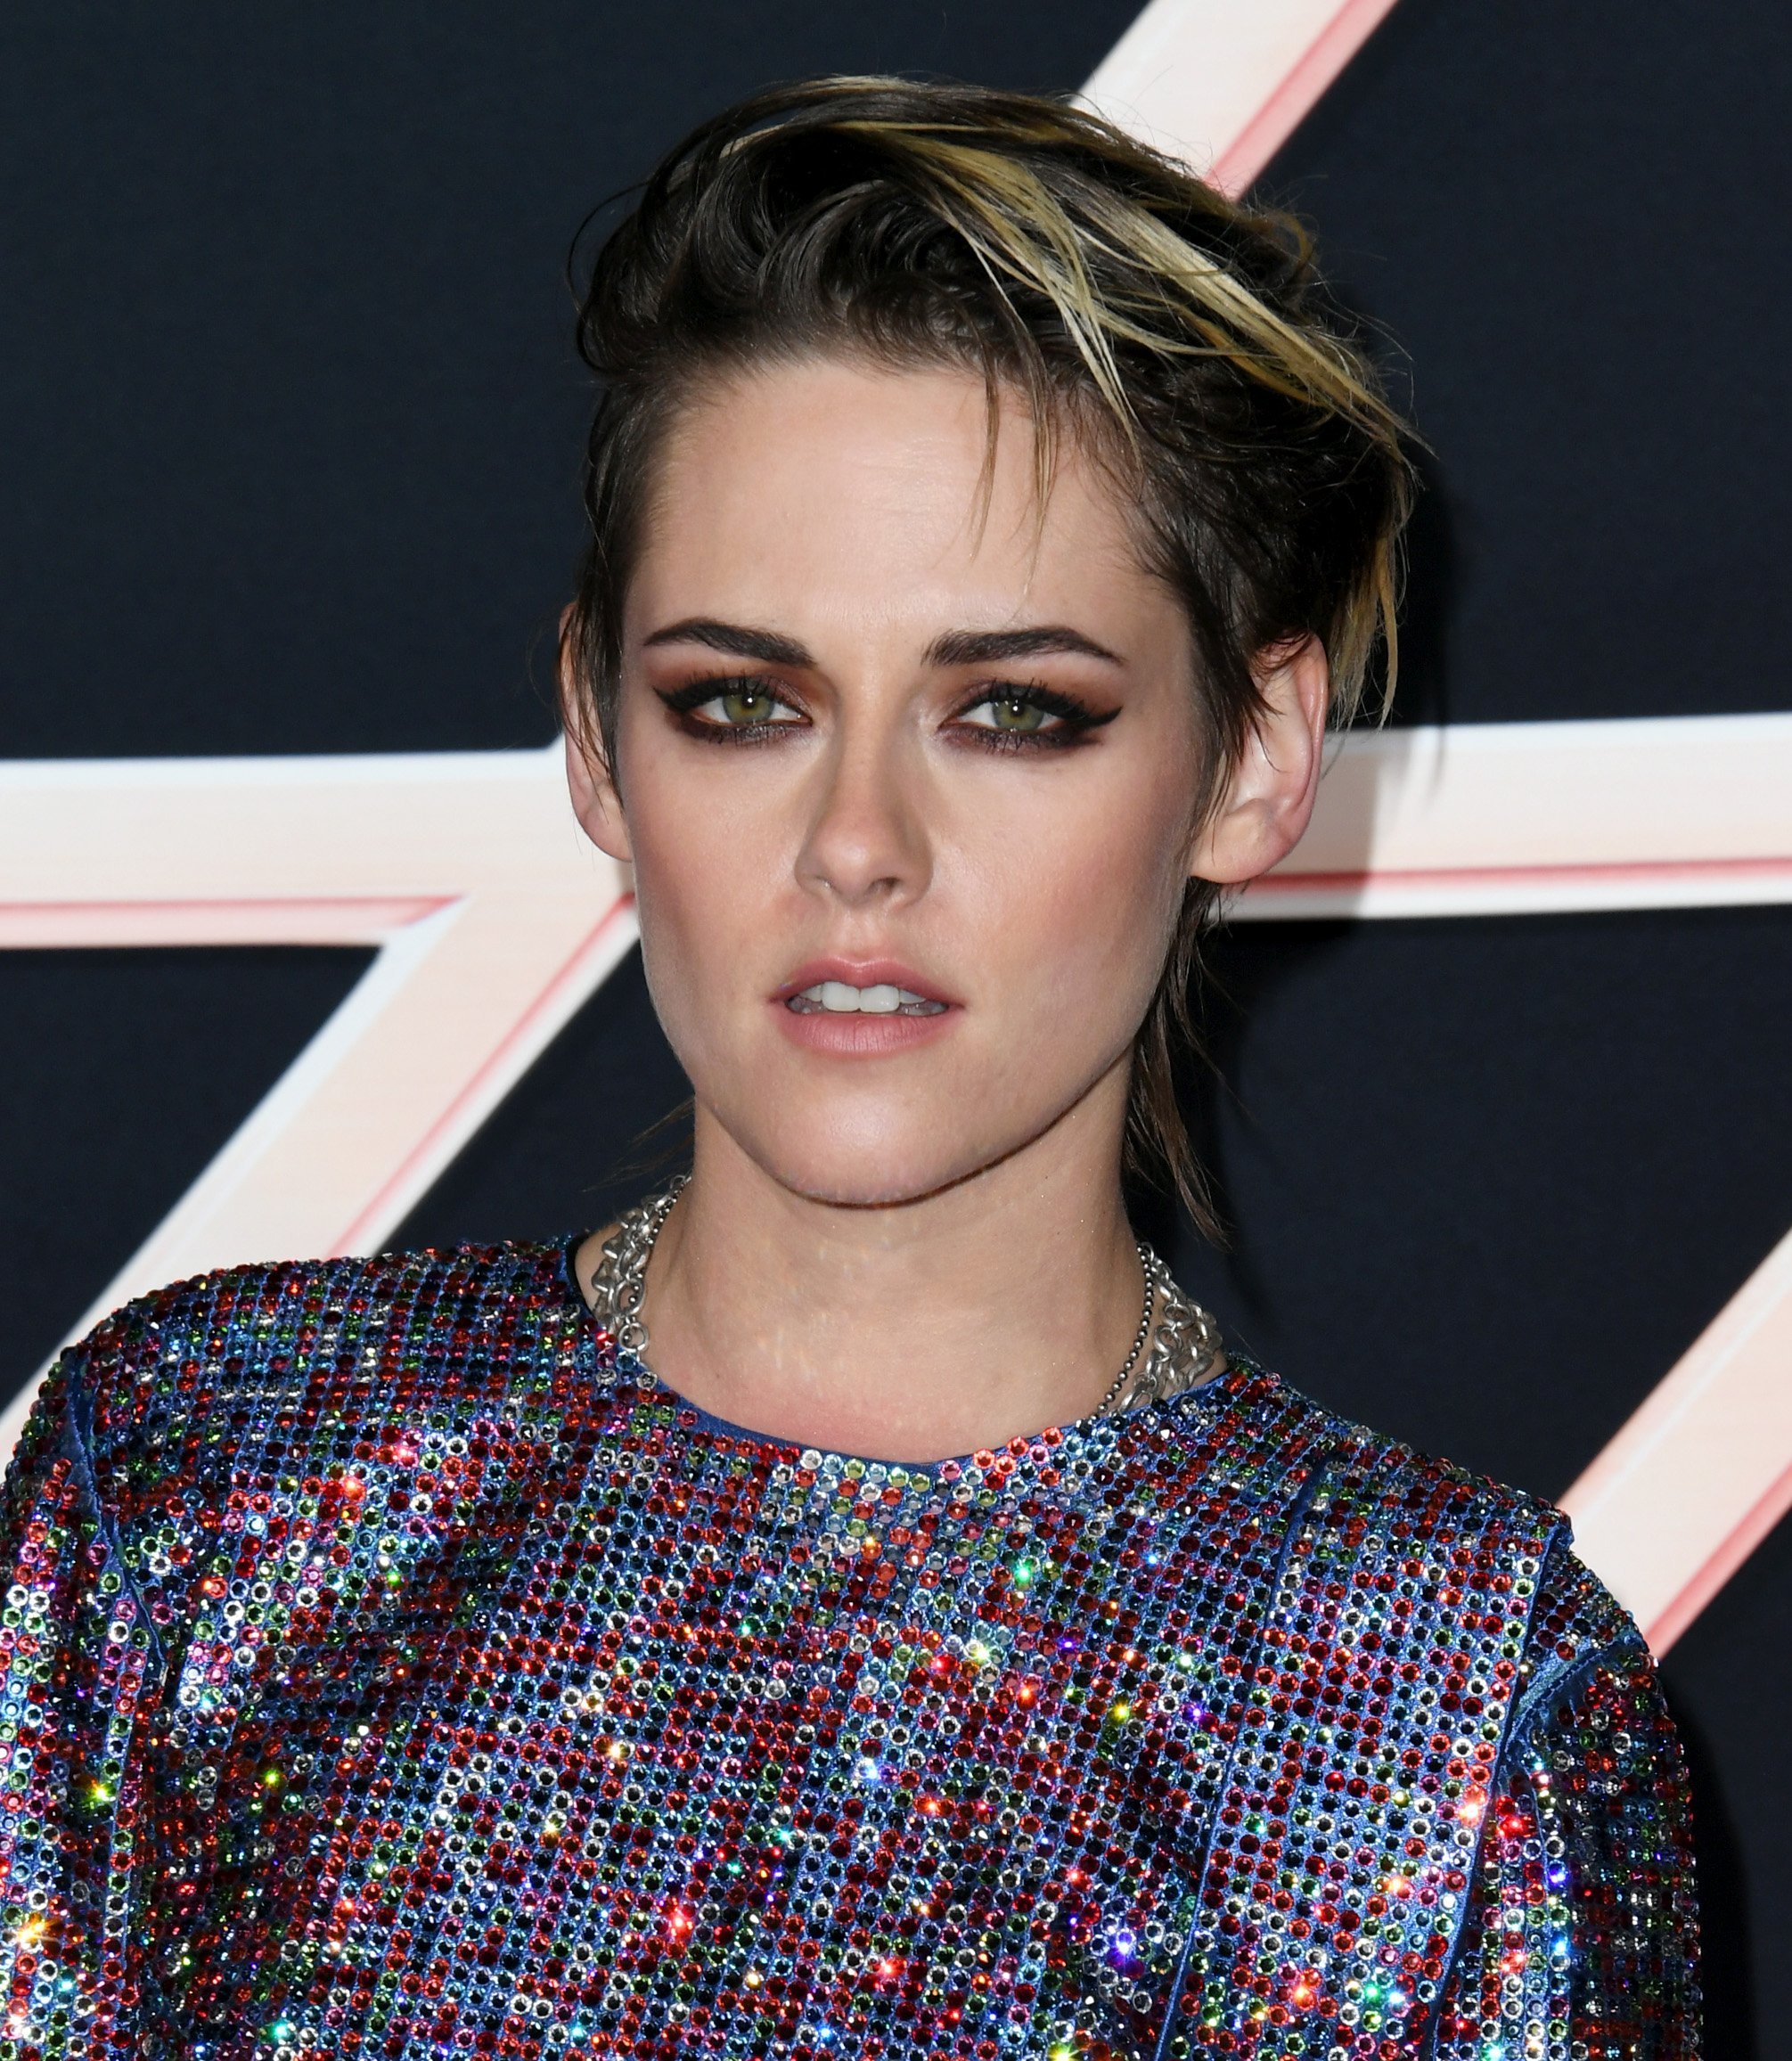 Kristen Stewart attends the premiere of Columbia Pictures' "Charlie's Angels" at Westwood Regency Theater on November 11, 2019, in Los Angeles, California. | Source: Getty Images.